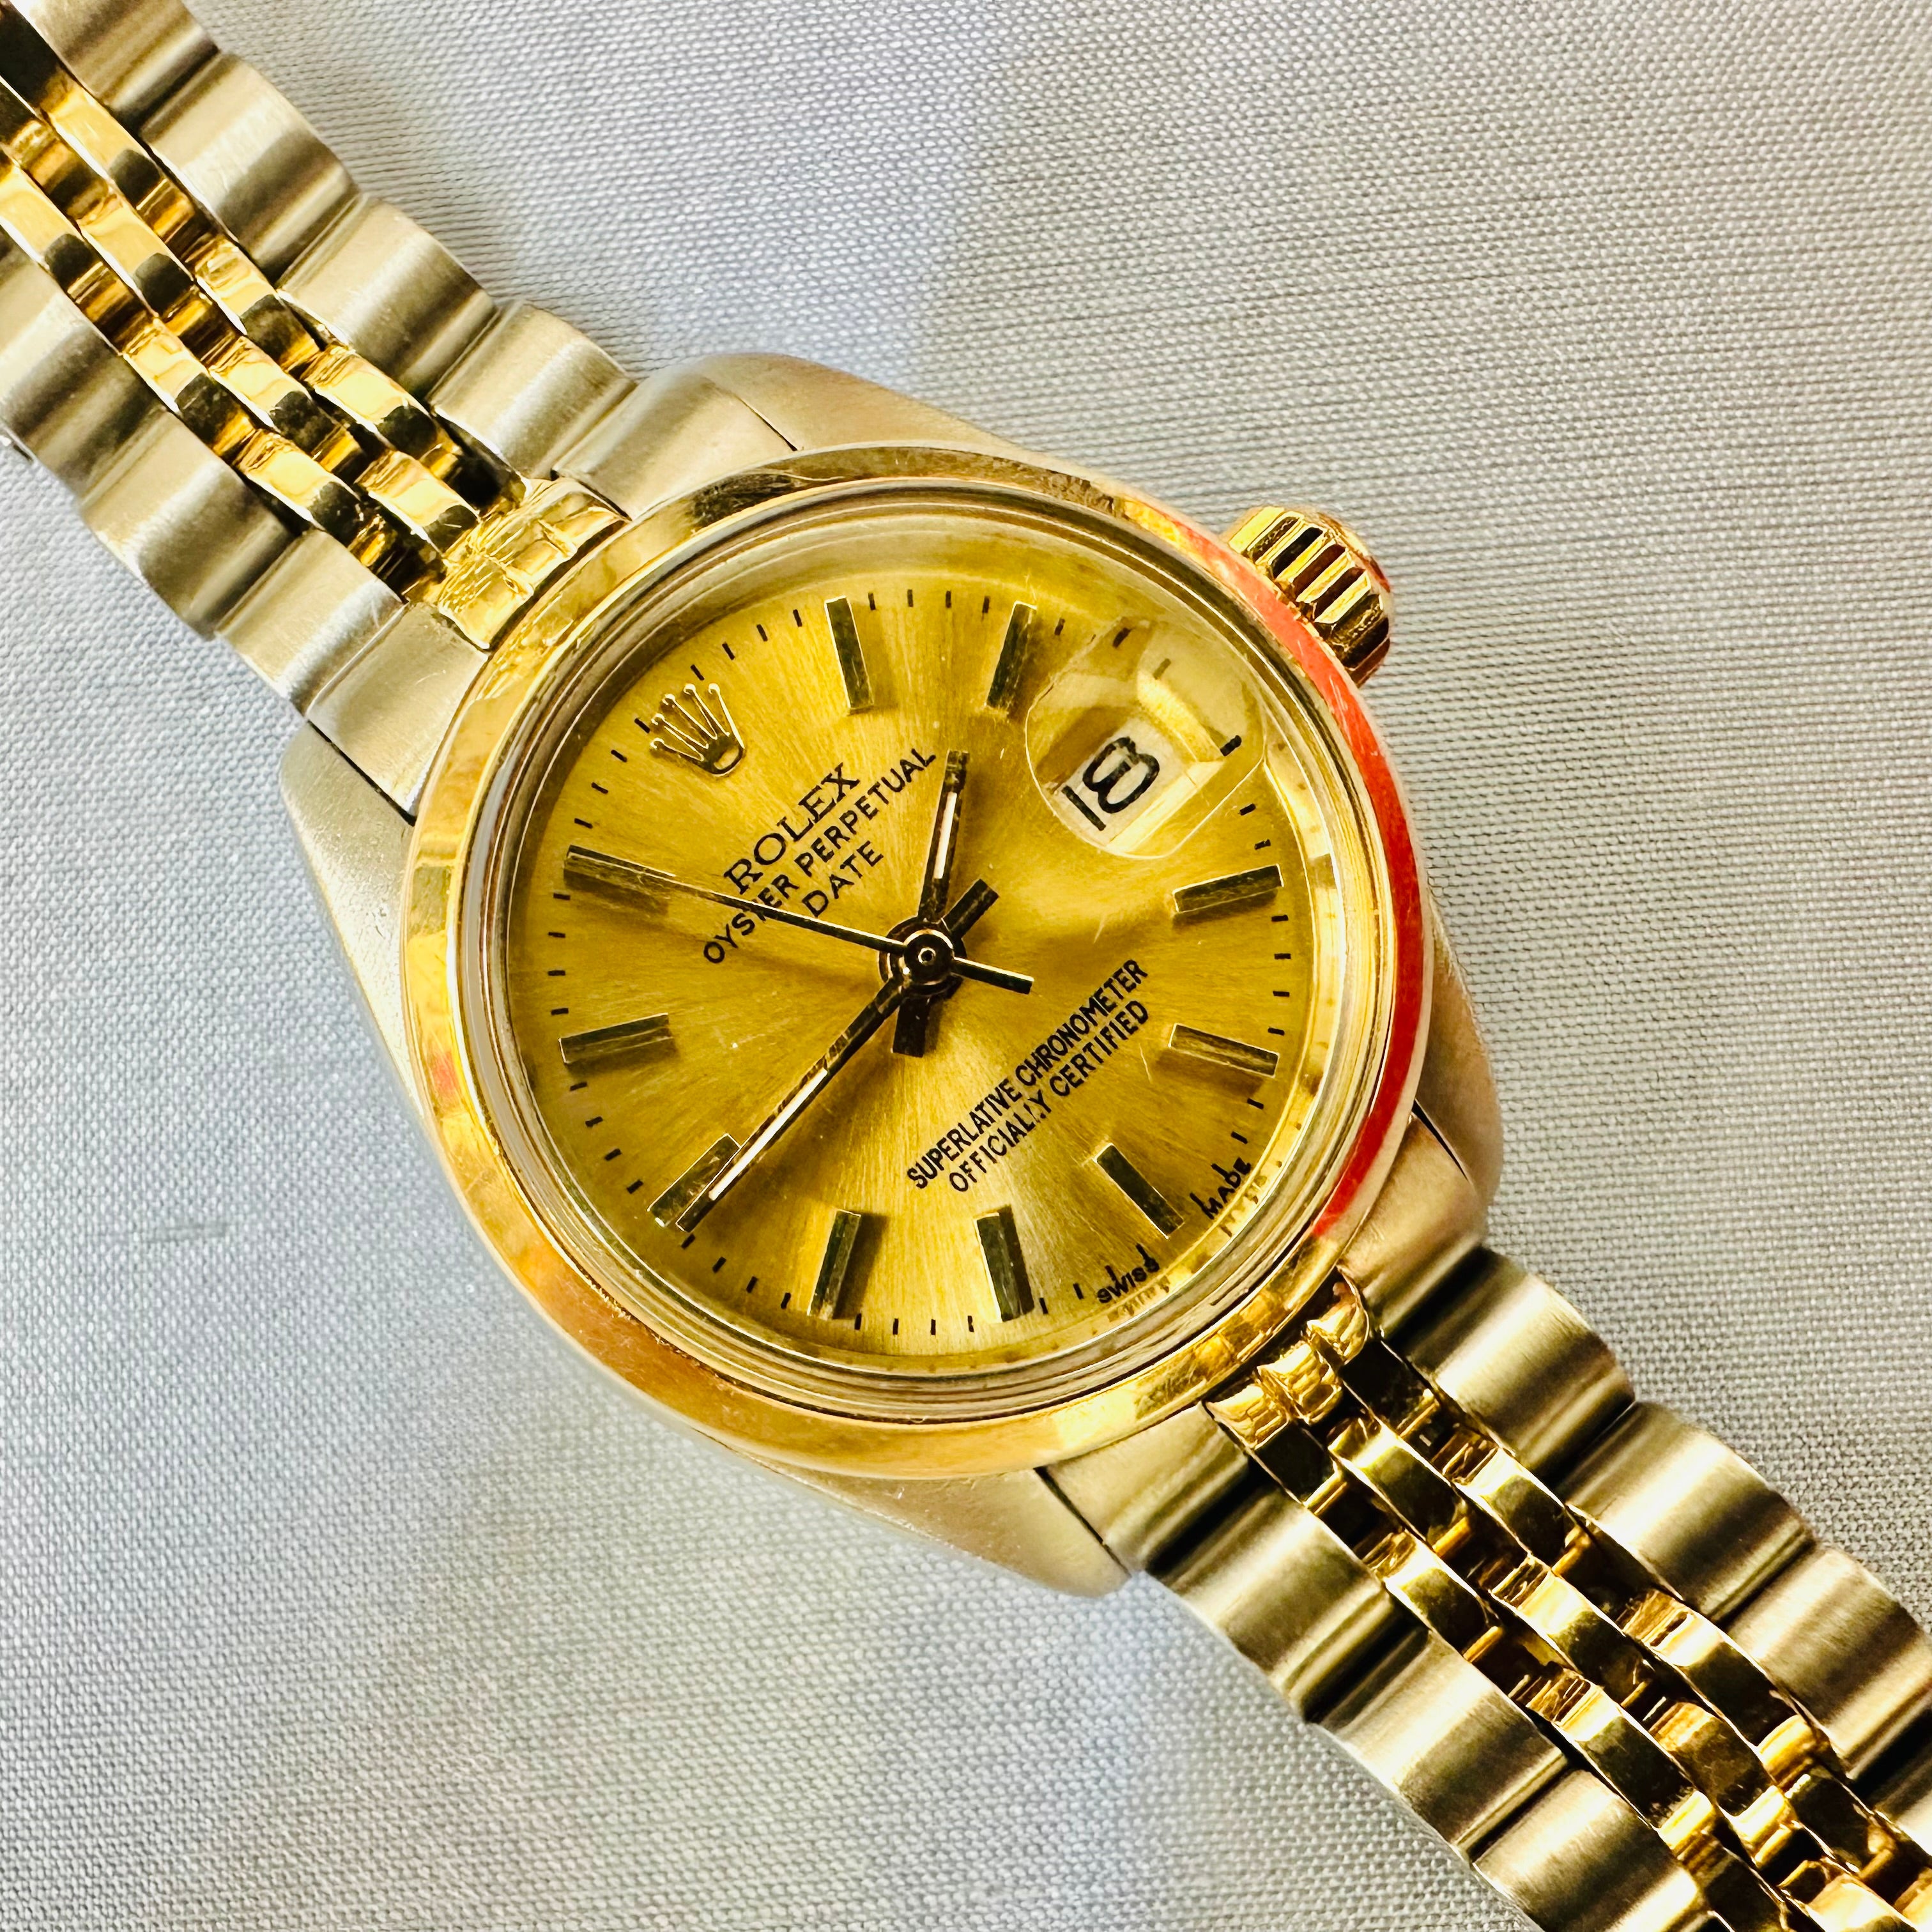 26mm Rolex Stainless Steel Oyster Perpetual With Two Tone Band With Yellow Dial